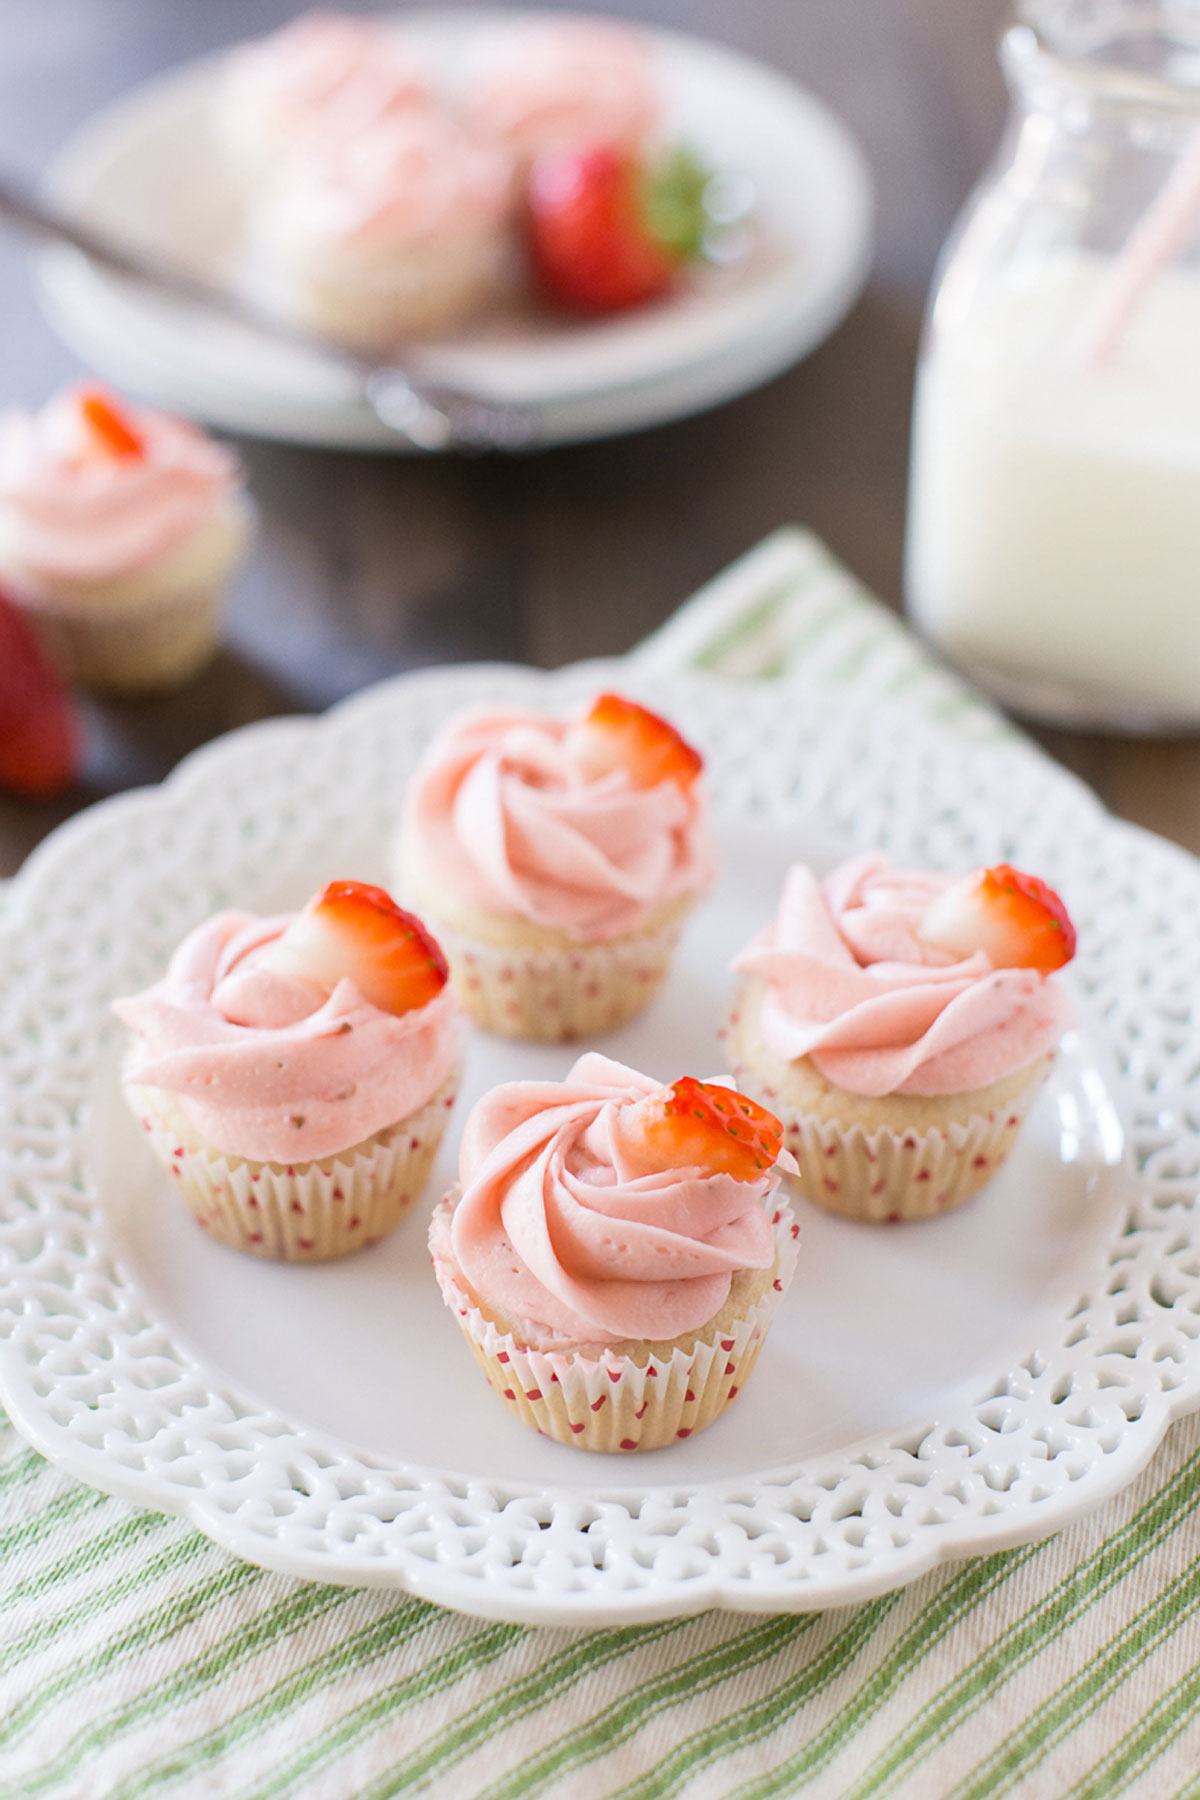 Strawberry Cupcakes with Strawberry Buttercream Frosting